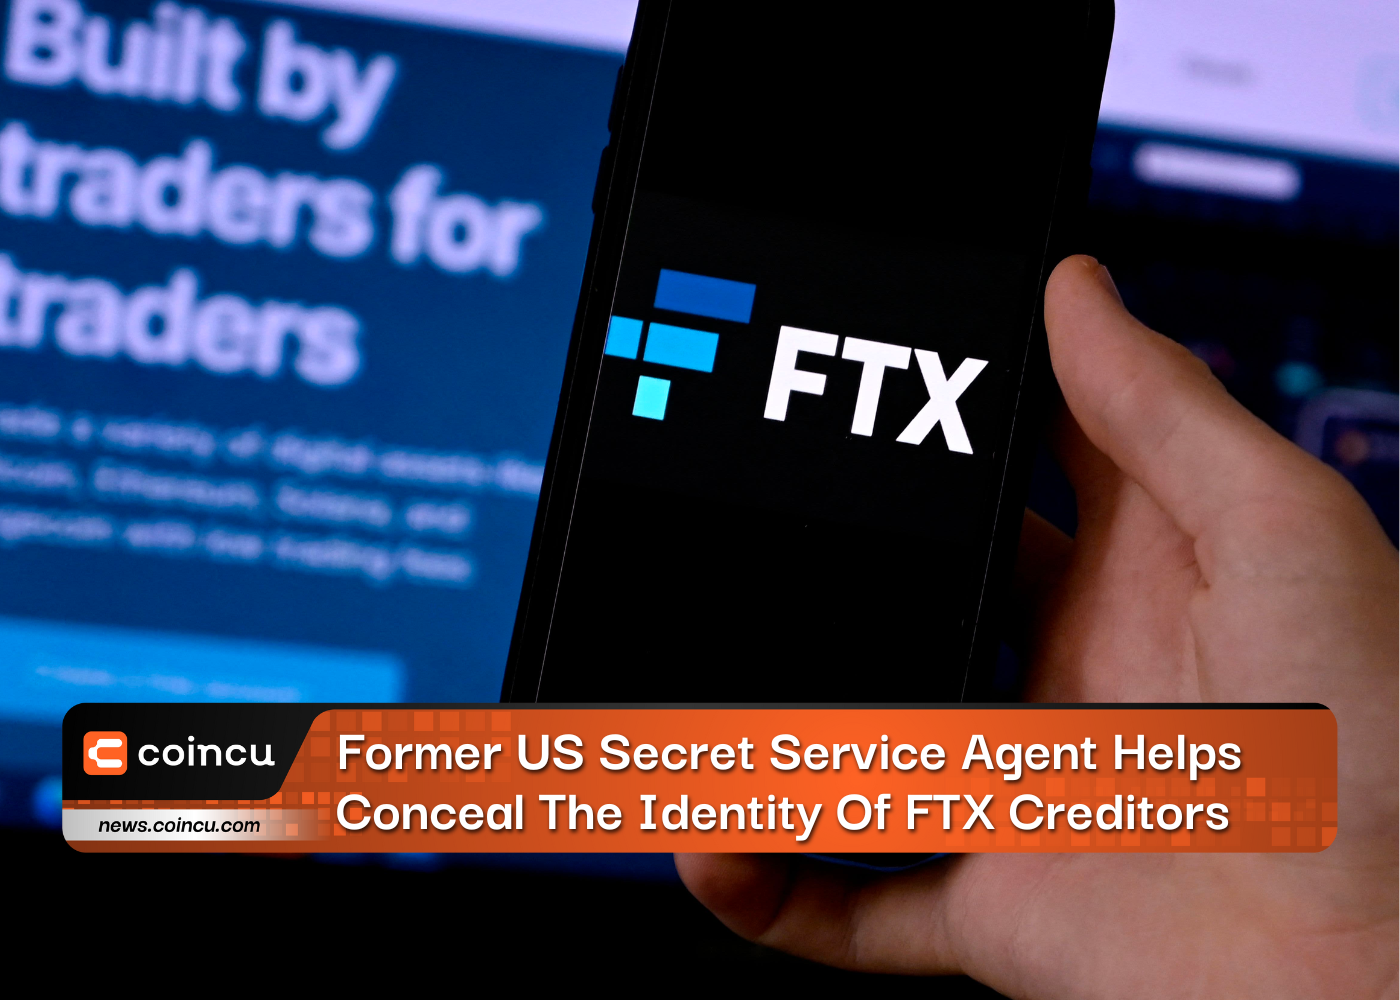 Former US Secret Service Agent Helps Conceal The Identity Of FTX Creditors